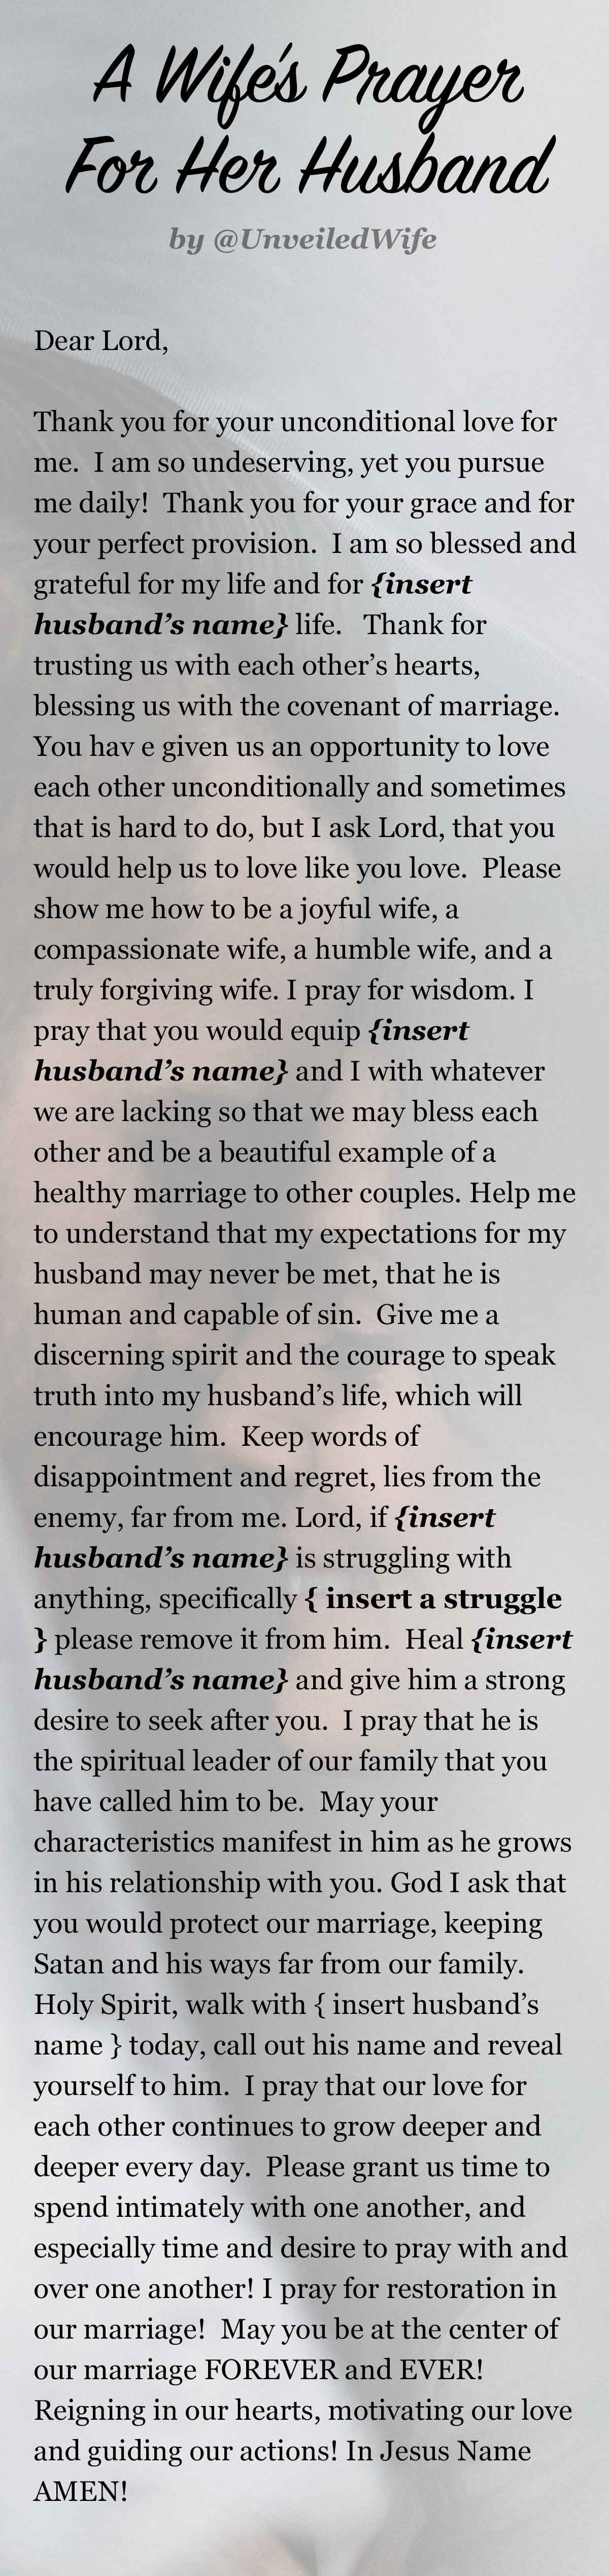 A Wife’s Prayer For Her Husband